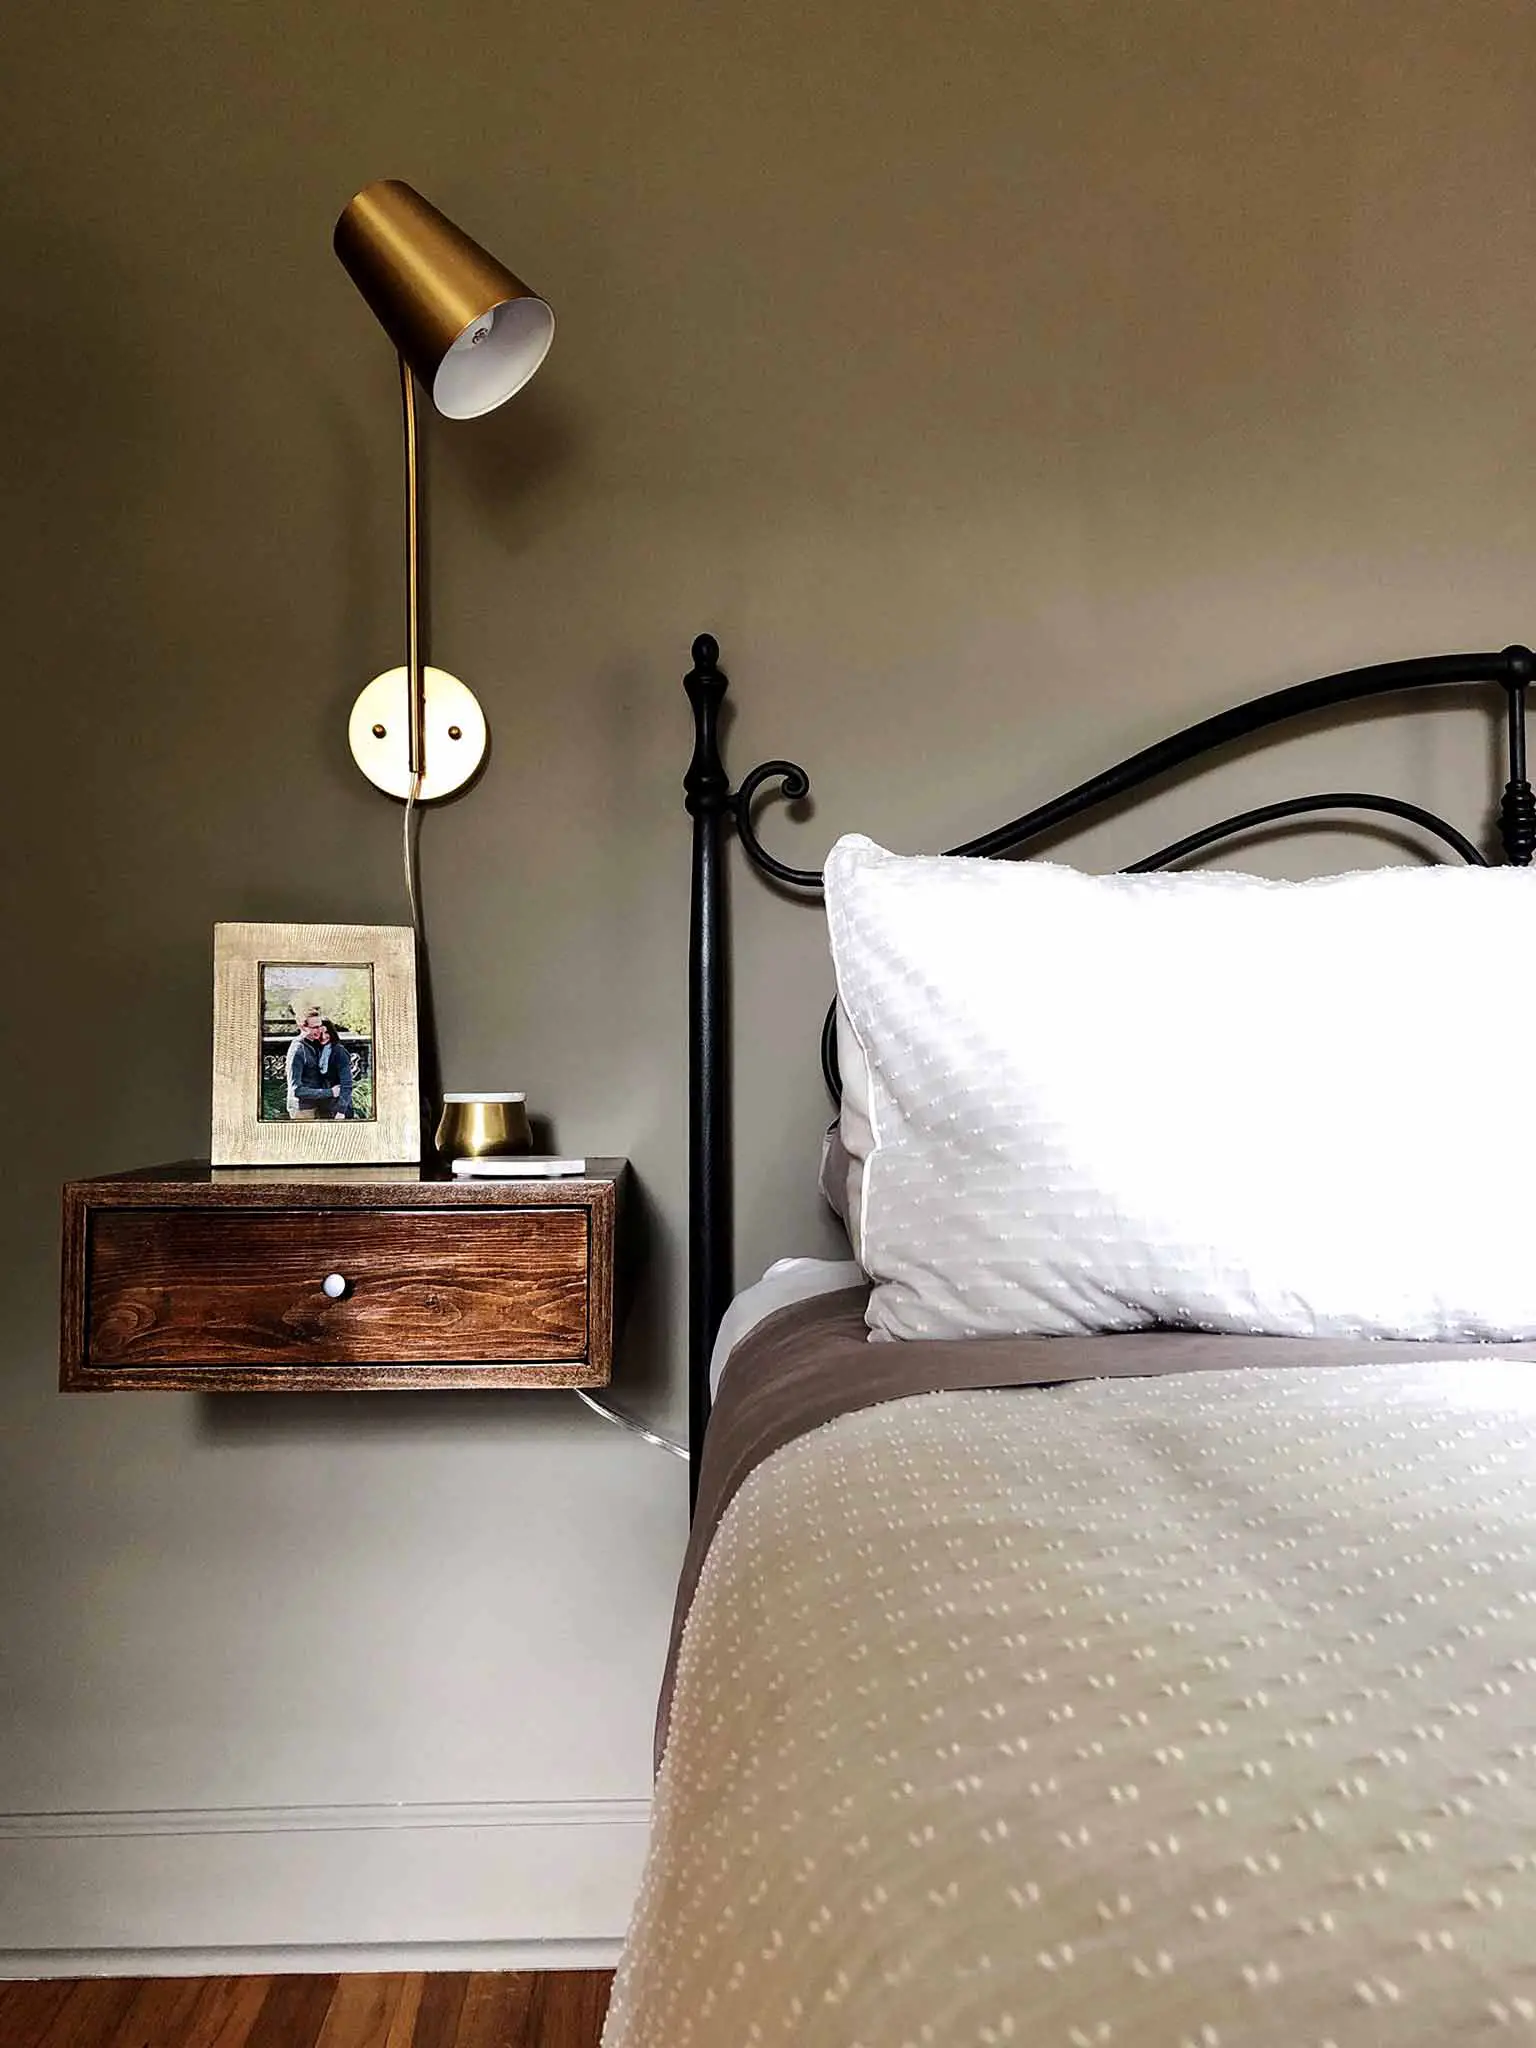 Master Bedroom Progress floating nightstands and wall mounted lamps - The One Room Challenge - That Homebird Life Blog